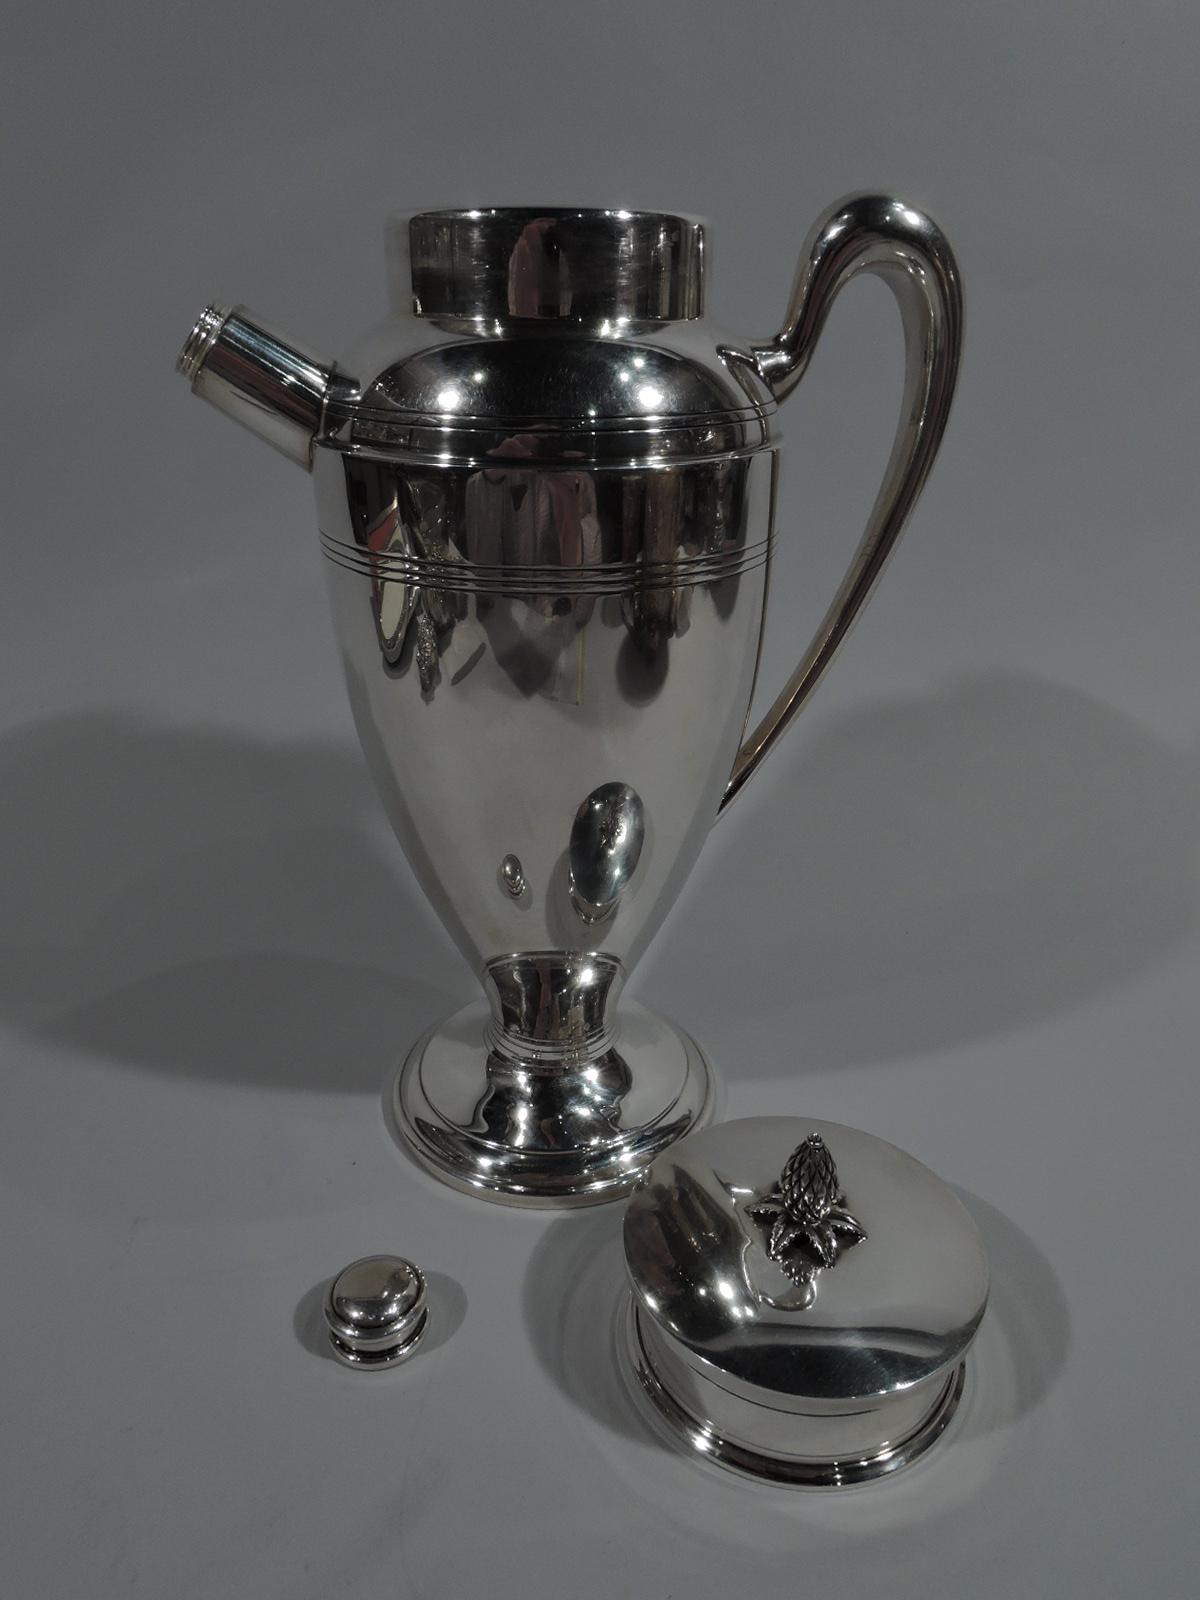 Art Deco sterling silver cocktail Shaker. Made by Redlich Ovoid body, stepped and domed foot, high-looping scroll handle, and straight and stubby spout with built-in strainer and threaded CAP. Short neck with flat cover surmounted by pineapple